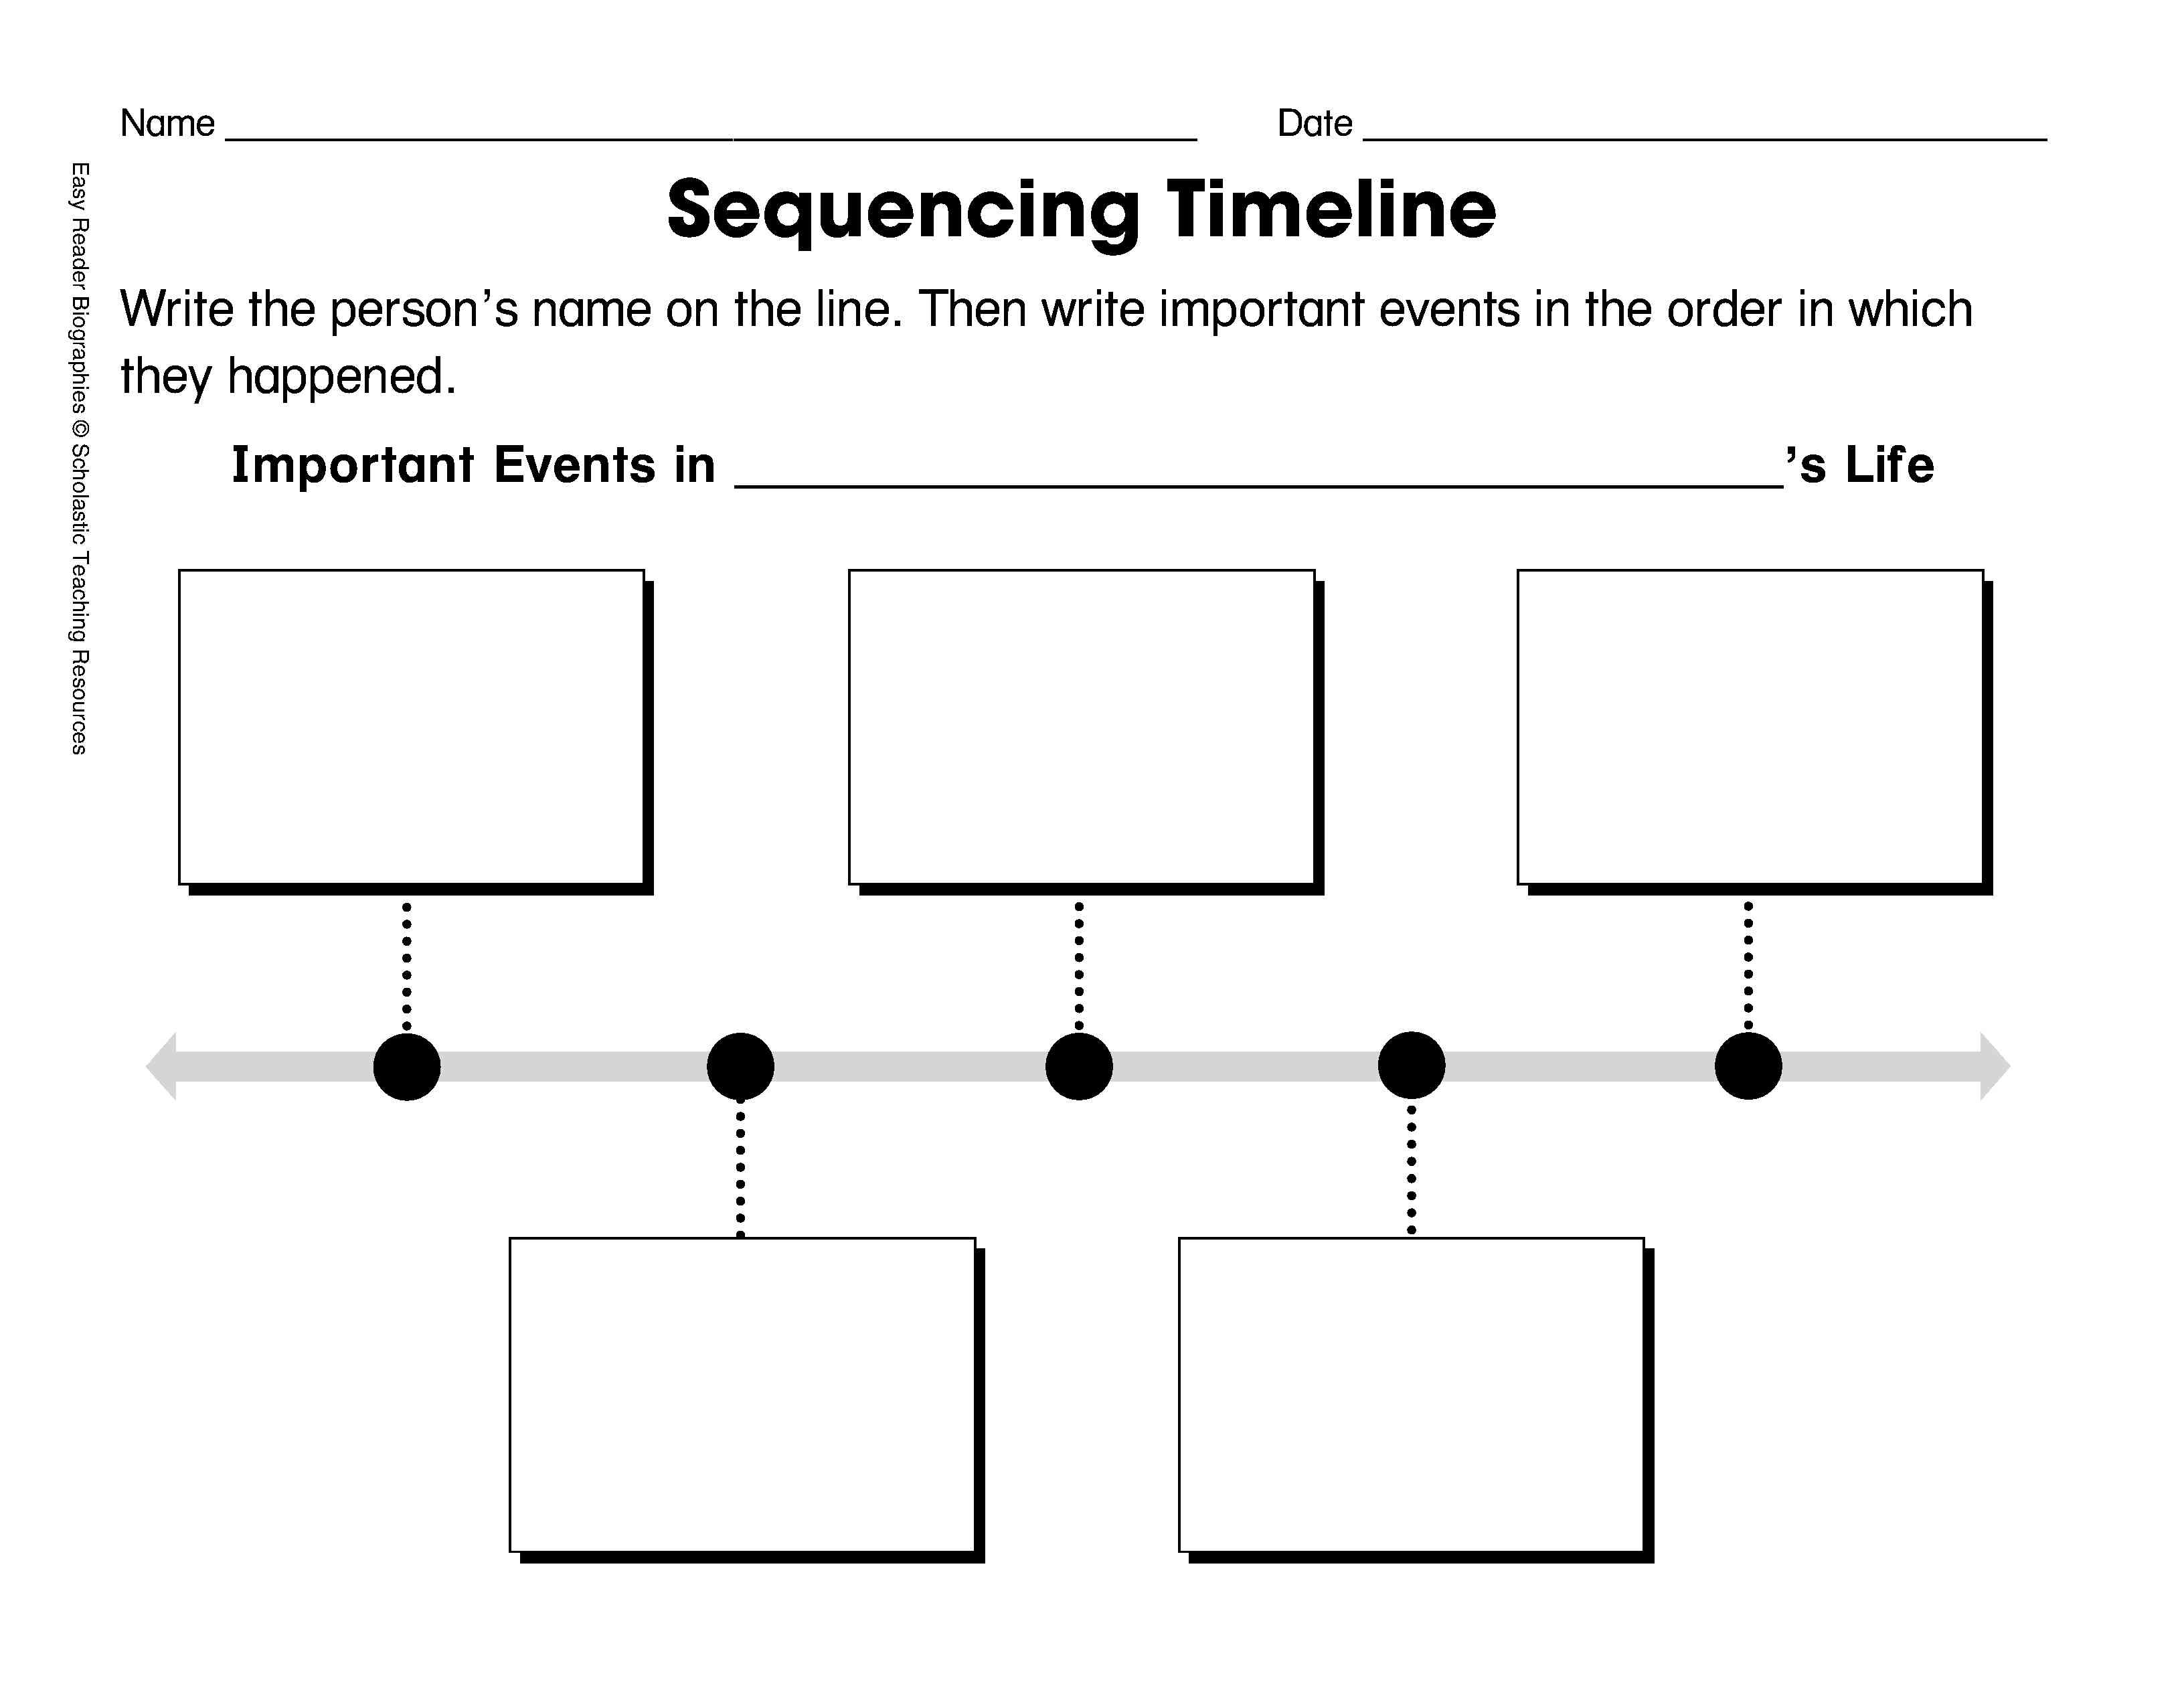 Sequencing Timeline Template: Ordering Biographical Events - Free Printable Sequence Of Events Graphic Organizer